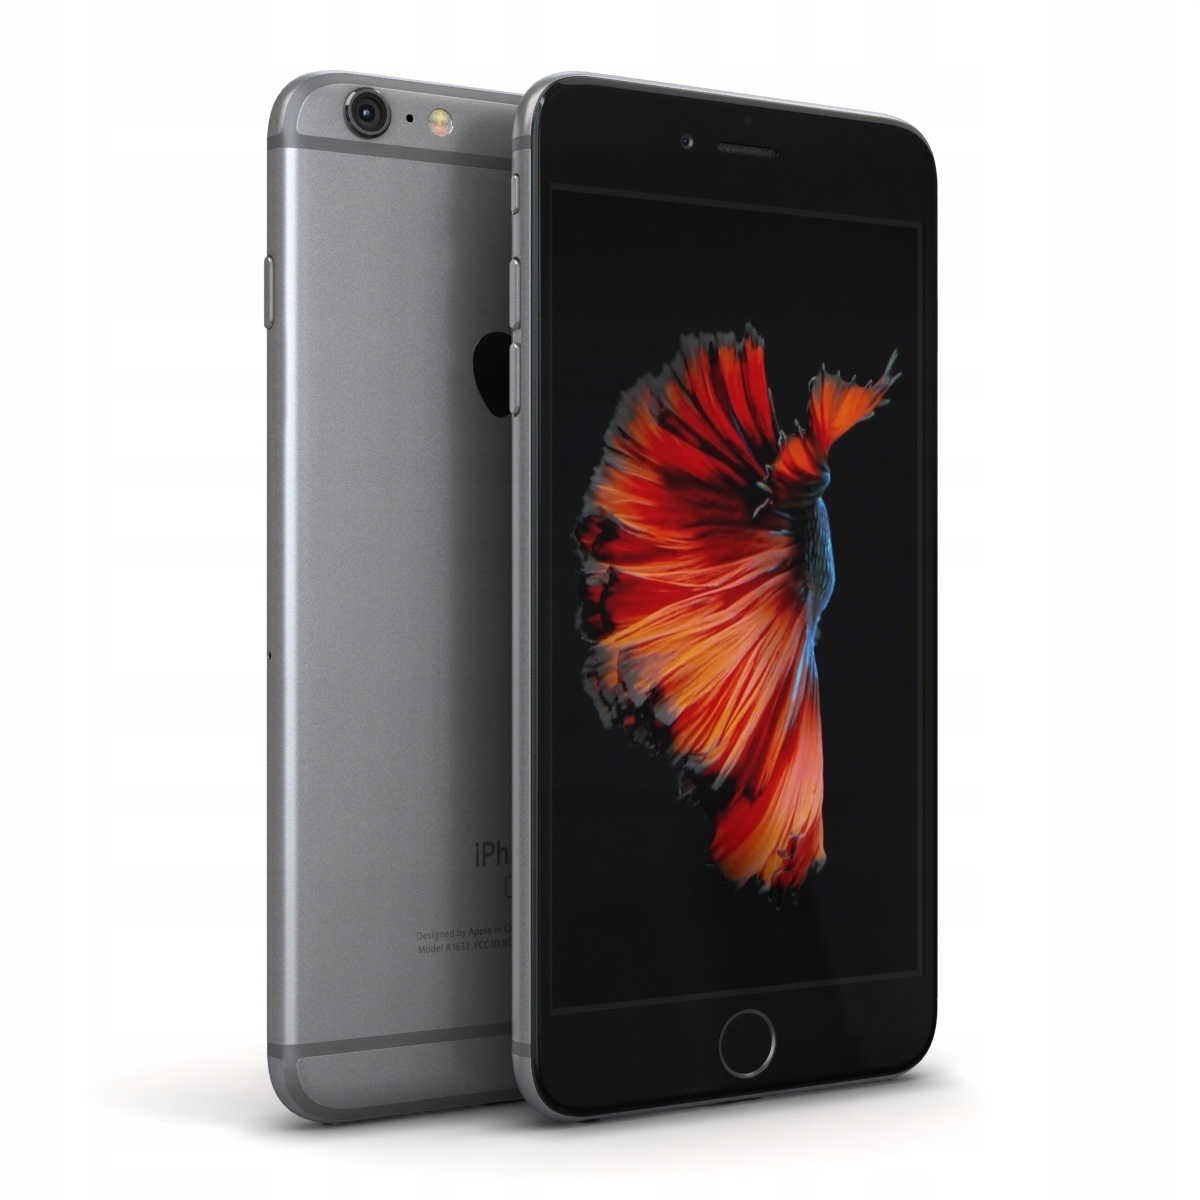 Iphone s. Iphone 6s Space Gray. Apple iphone 6s 32gb Space Gray. Iphone 6s 64gb Space Gray. Apple iphone 6s 128 ГБ.